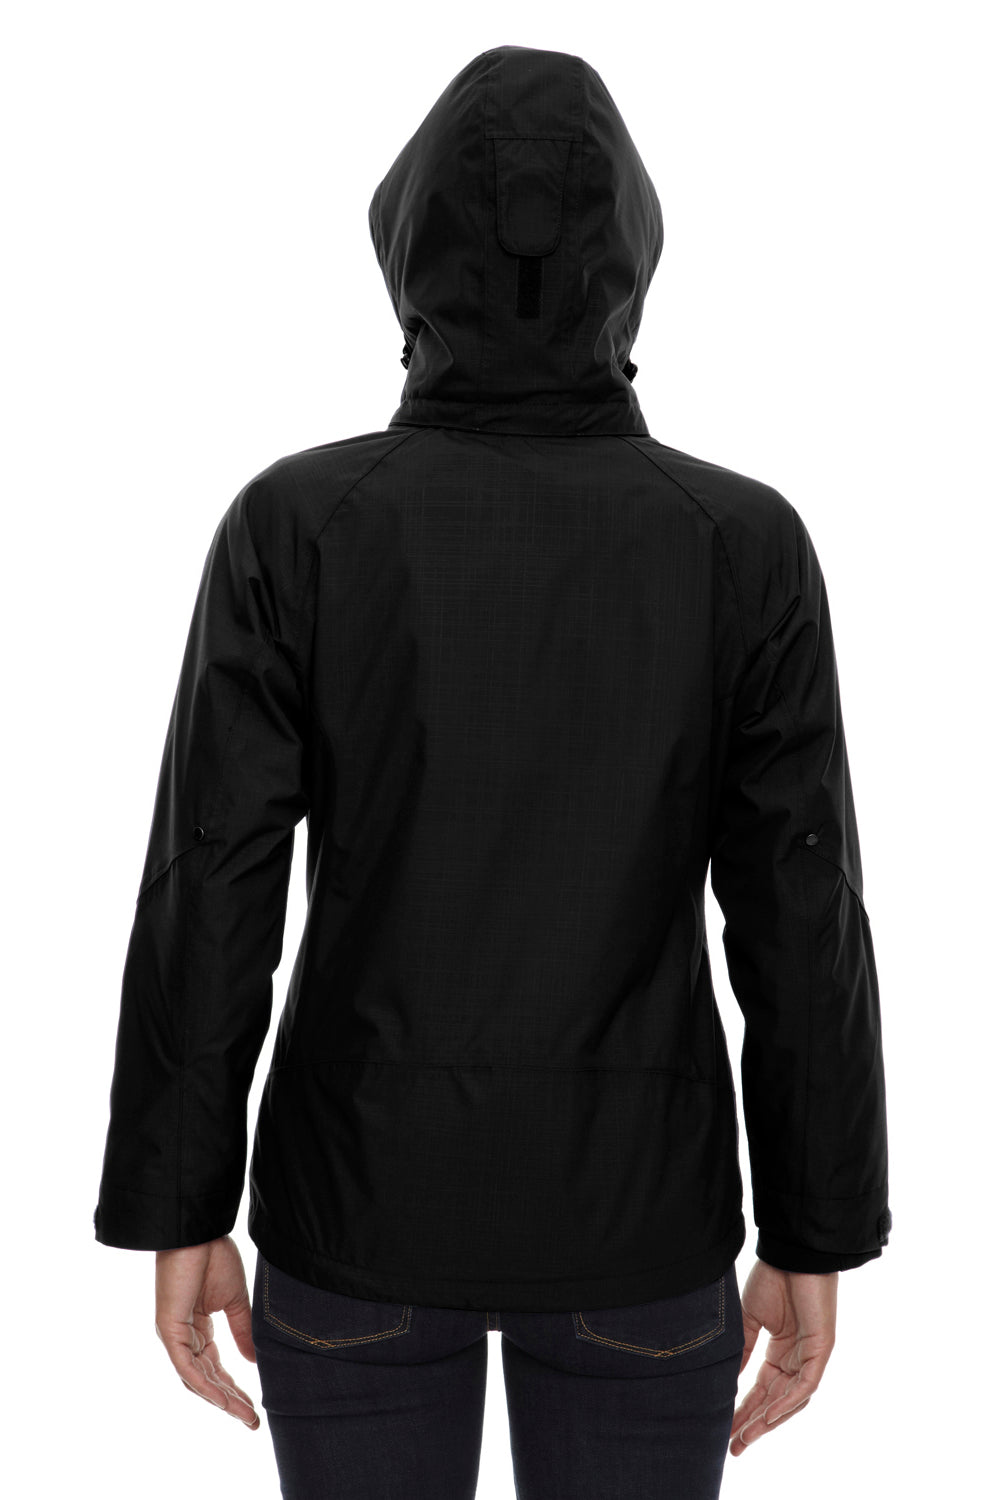 North End 78178 Womens Caprice 3-in-1 Full Zip Hooded Jacket Black Back